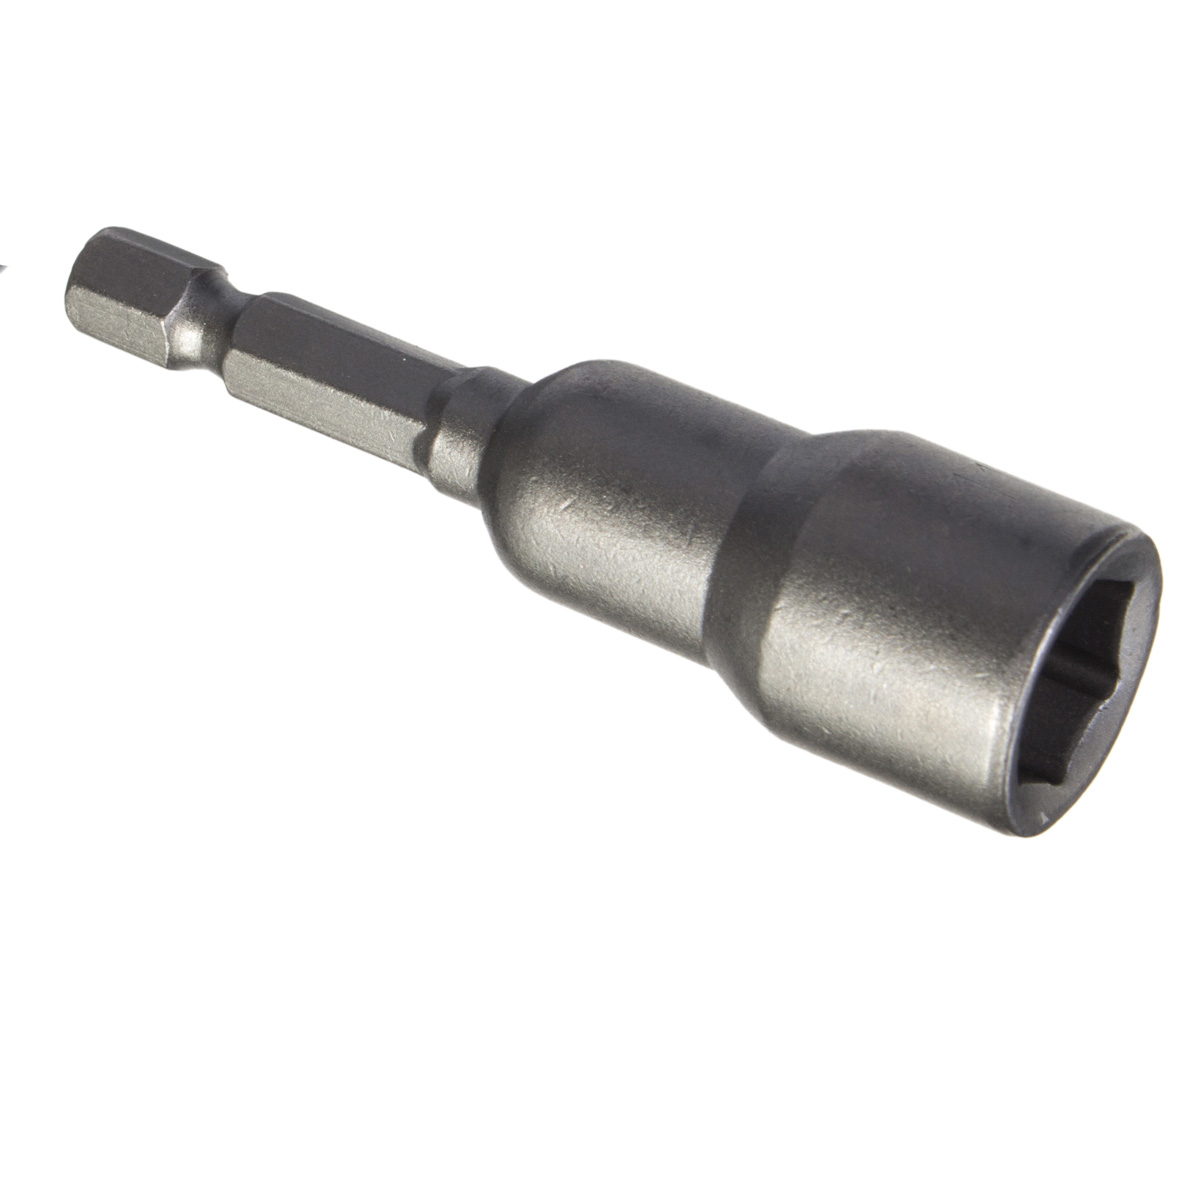 65mm-14-Inch-Hex-Socket-Magnetic-Nut-Driver-Setter-6mm-19mm-Drill-Bit-Adapter-996527-4